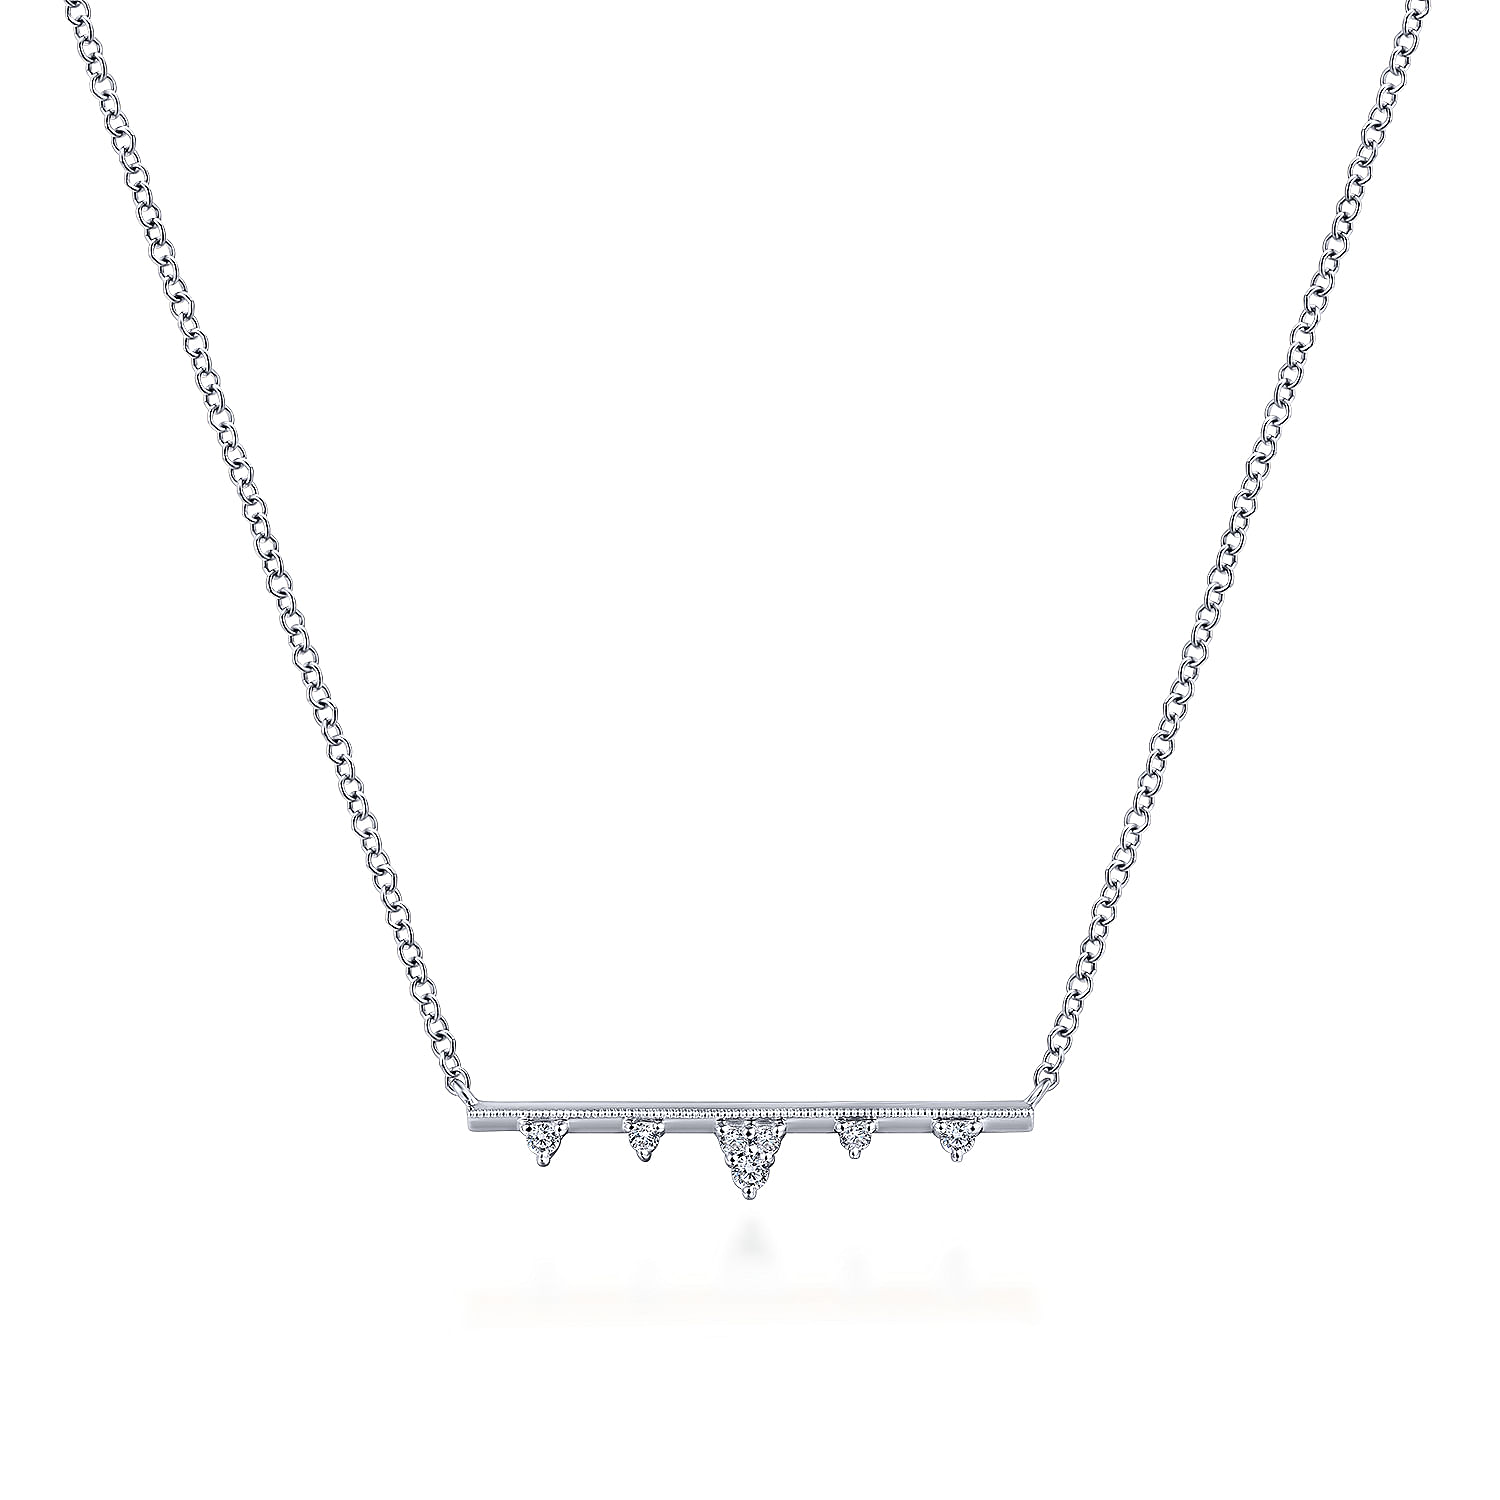 14K White Gold Bar Necklace with Diamond Triangle Stations